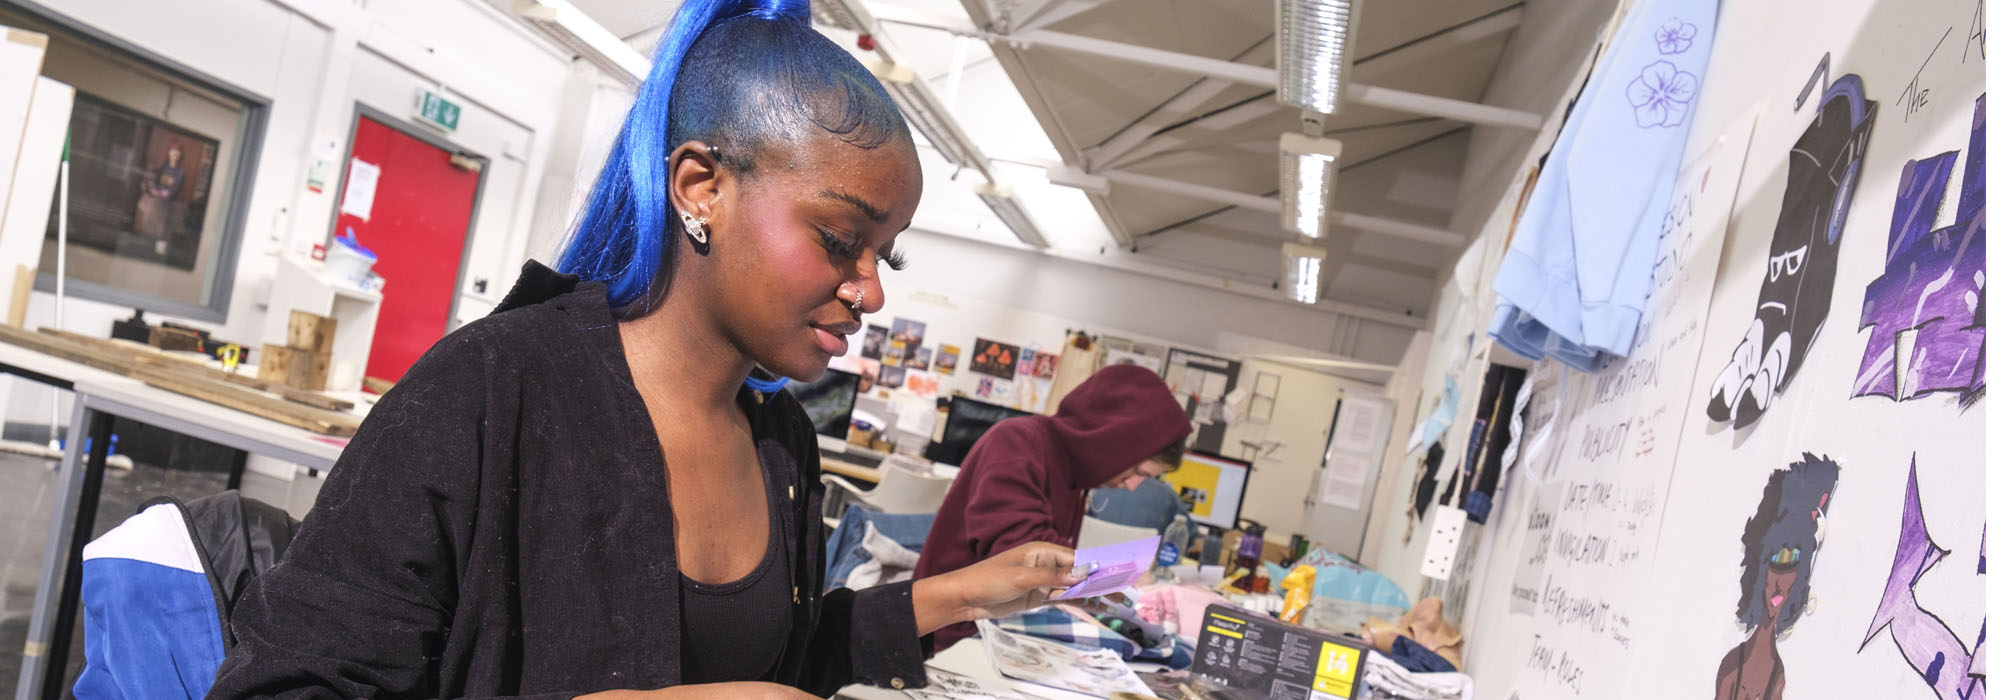 A female student with blue hair is working on a portfolio of printed graphics in the art and design workshop